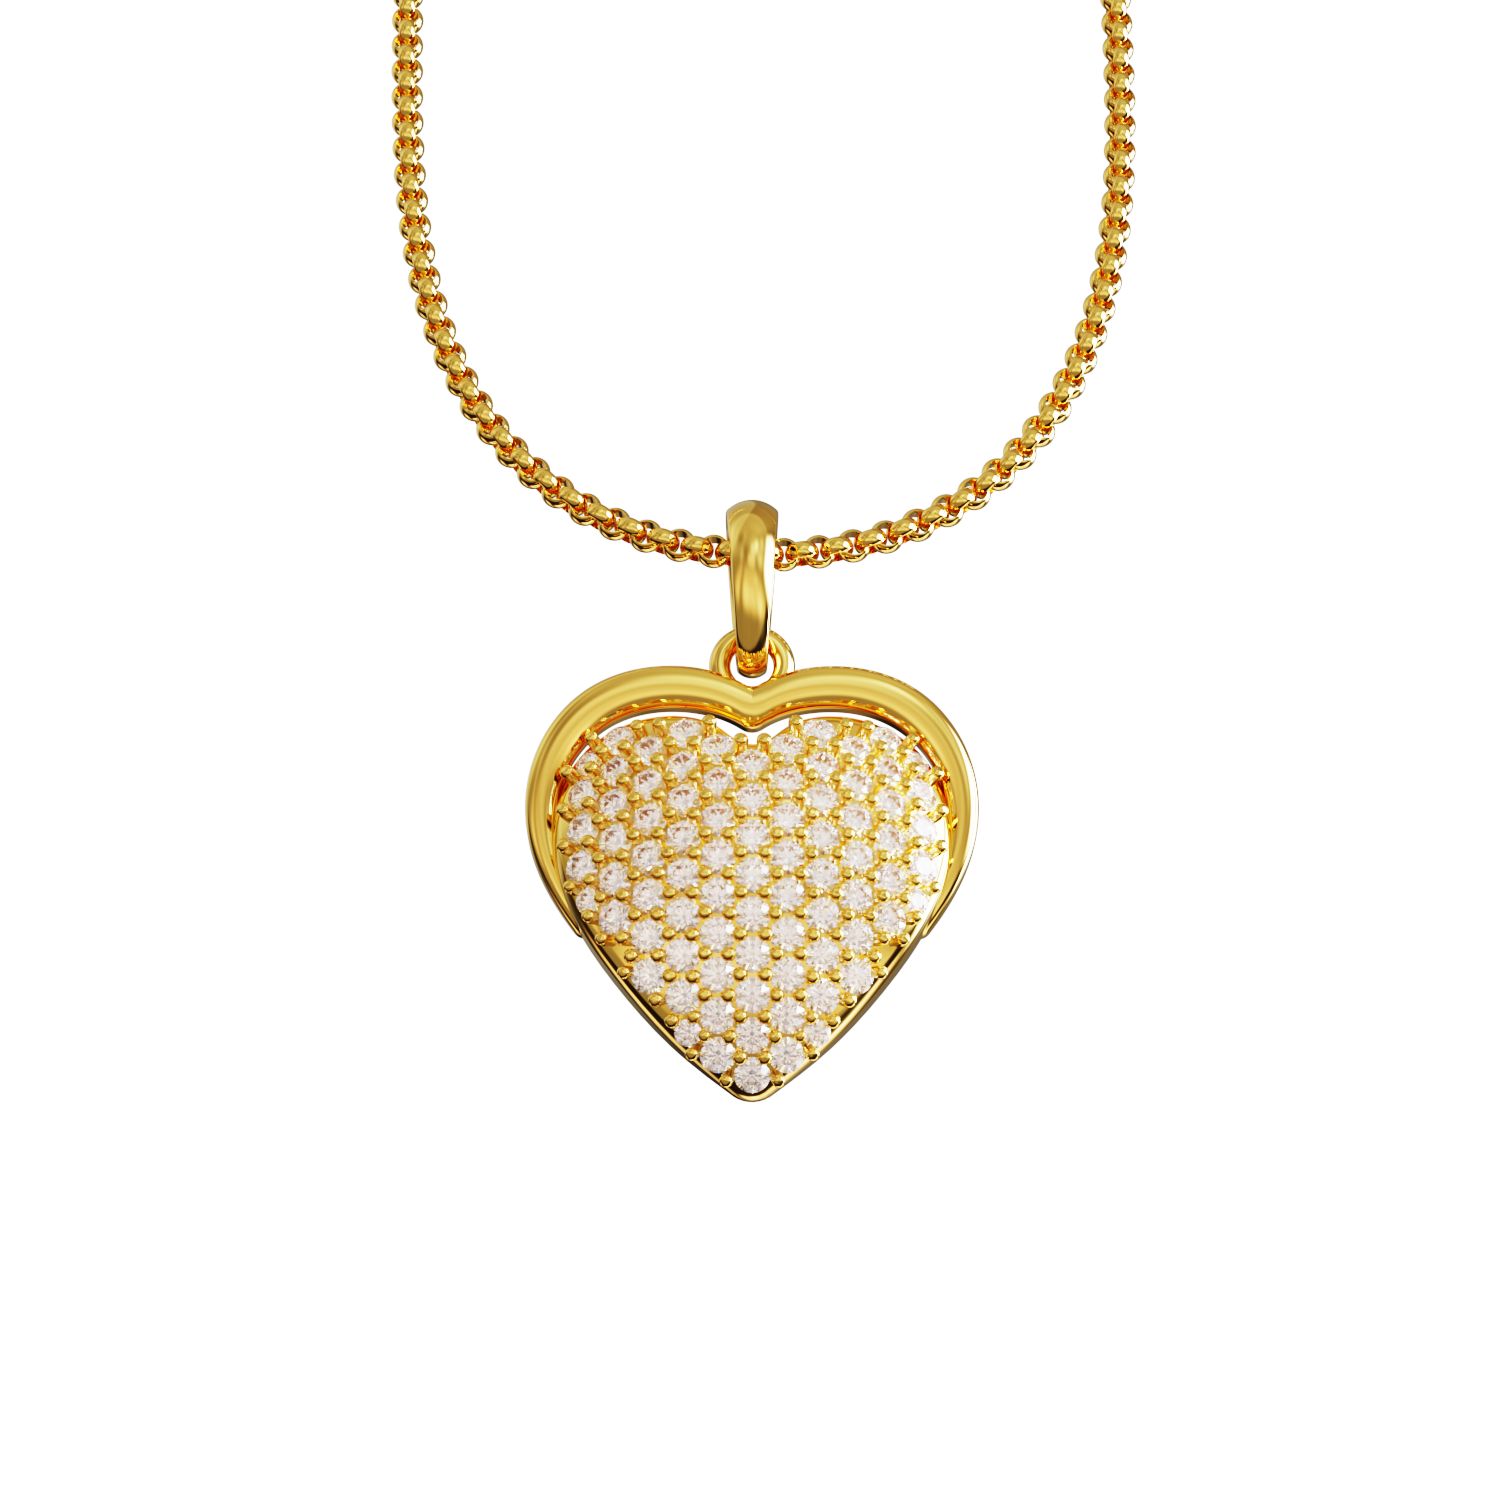 Gold Heart PNG Image File